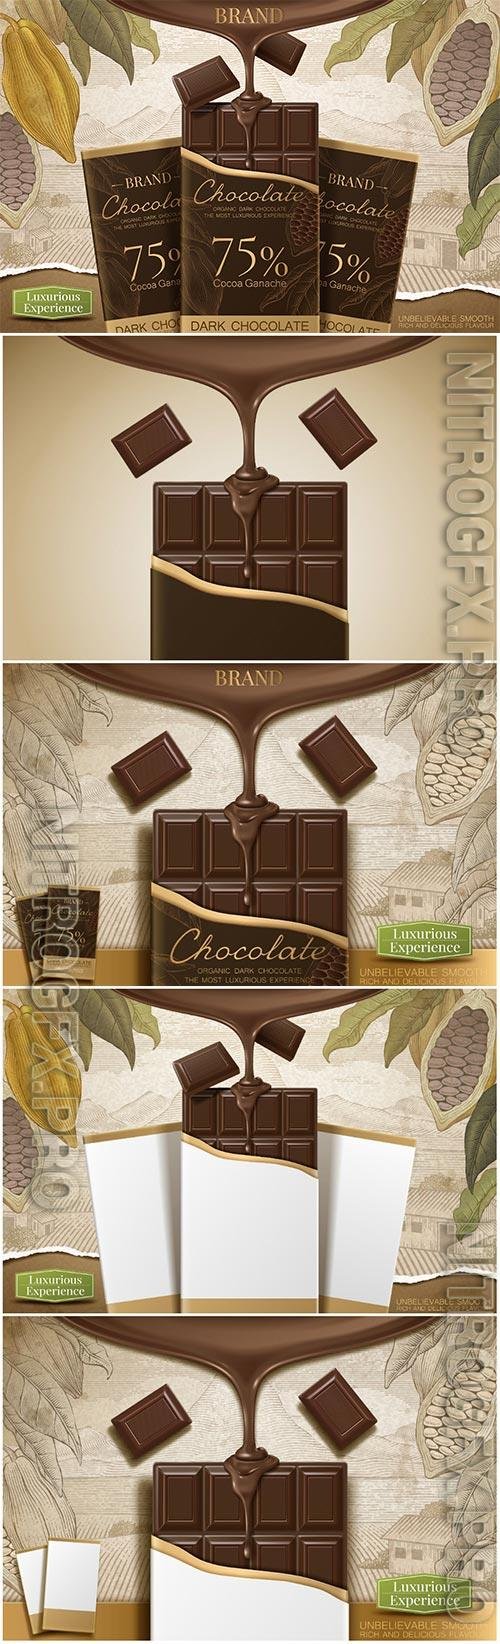 Chocolate advertising vintage poster in vector